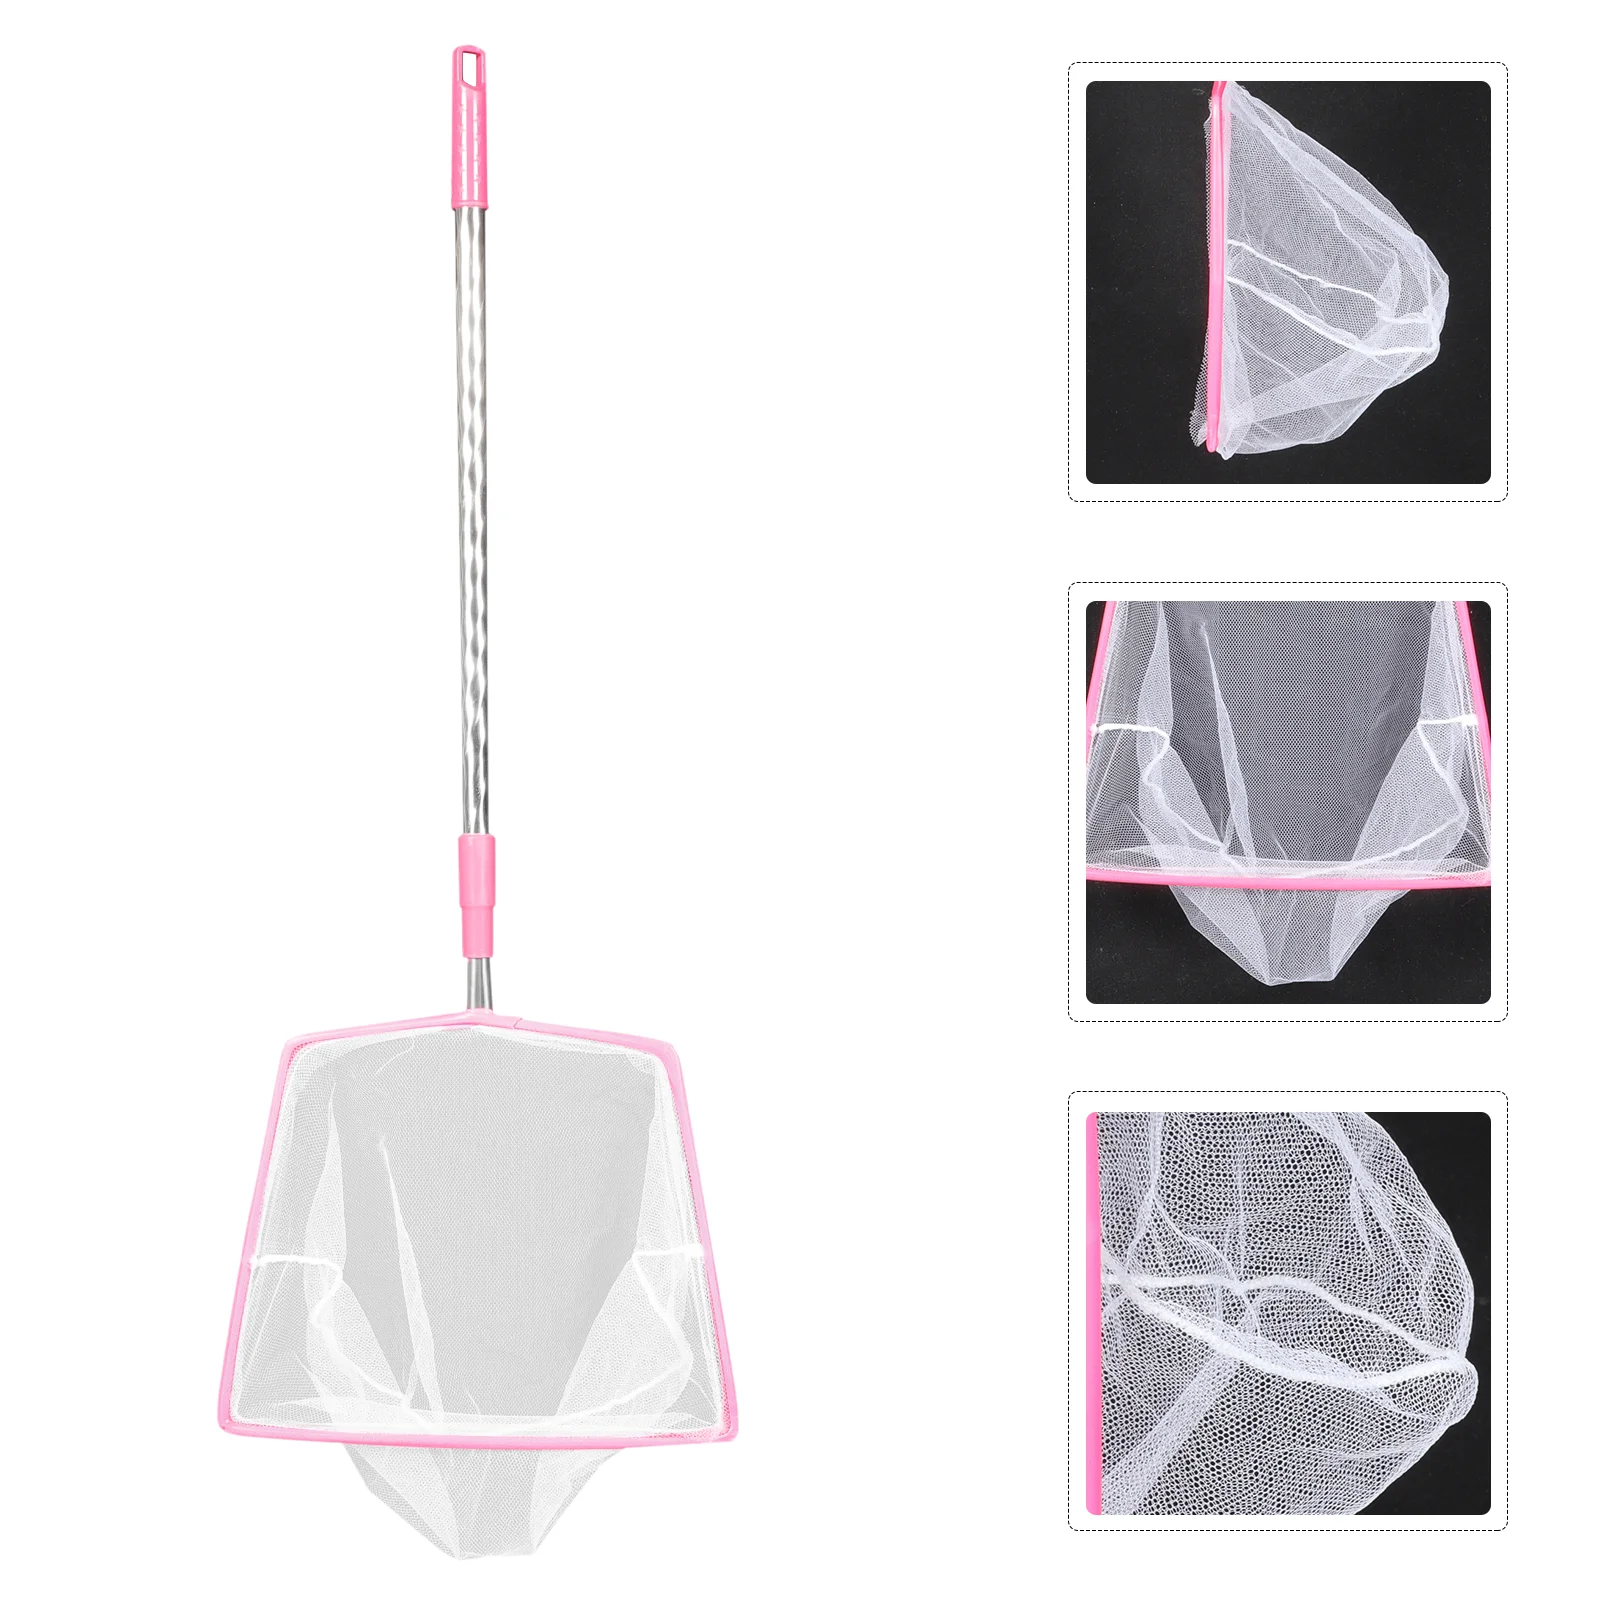 

Butterfly Net Practical Butterflies Telescopic Fishing Nets Telescoping Insects Catching Nylon Children Toy